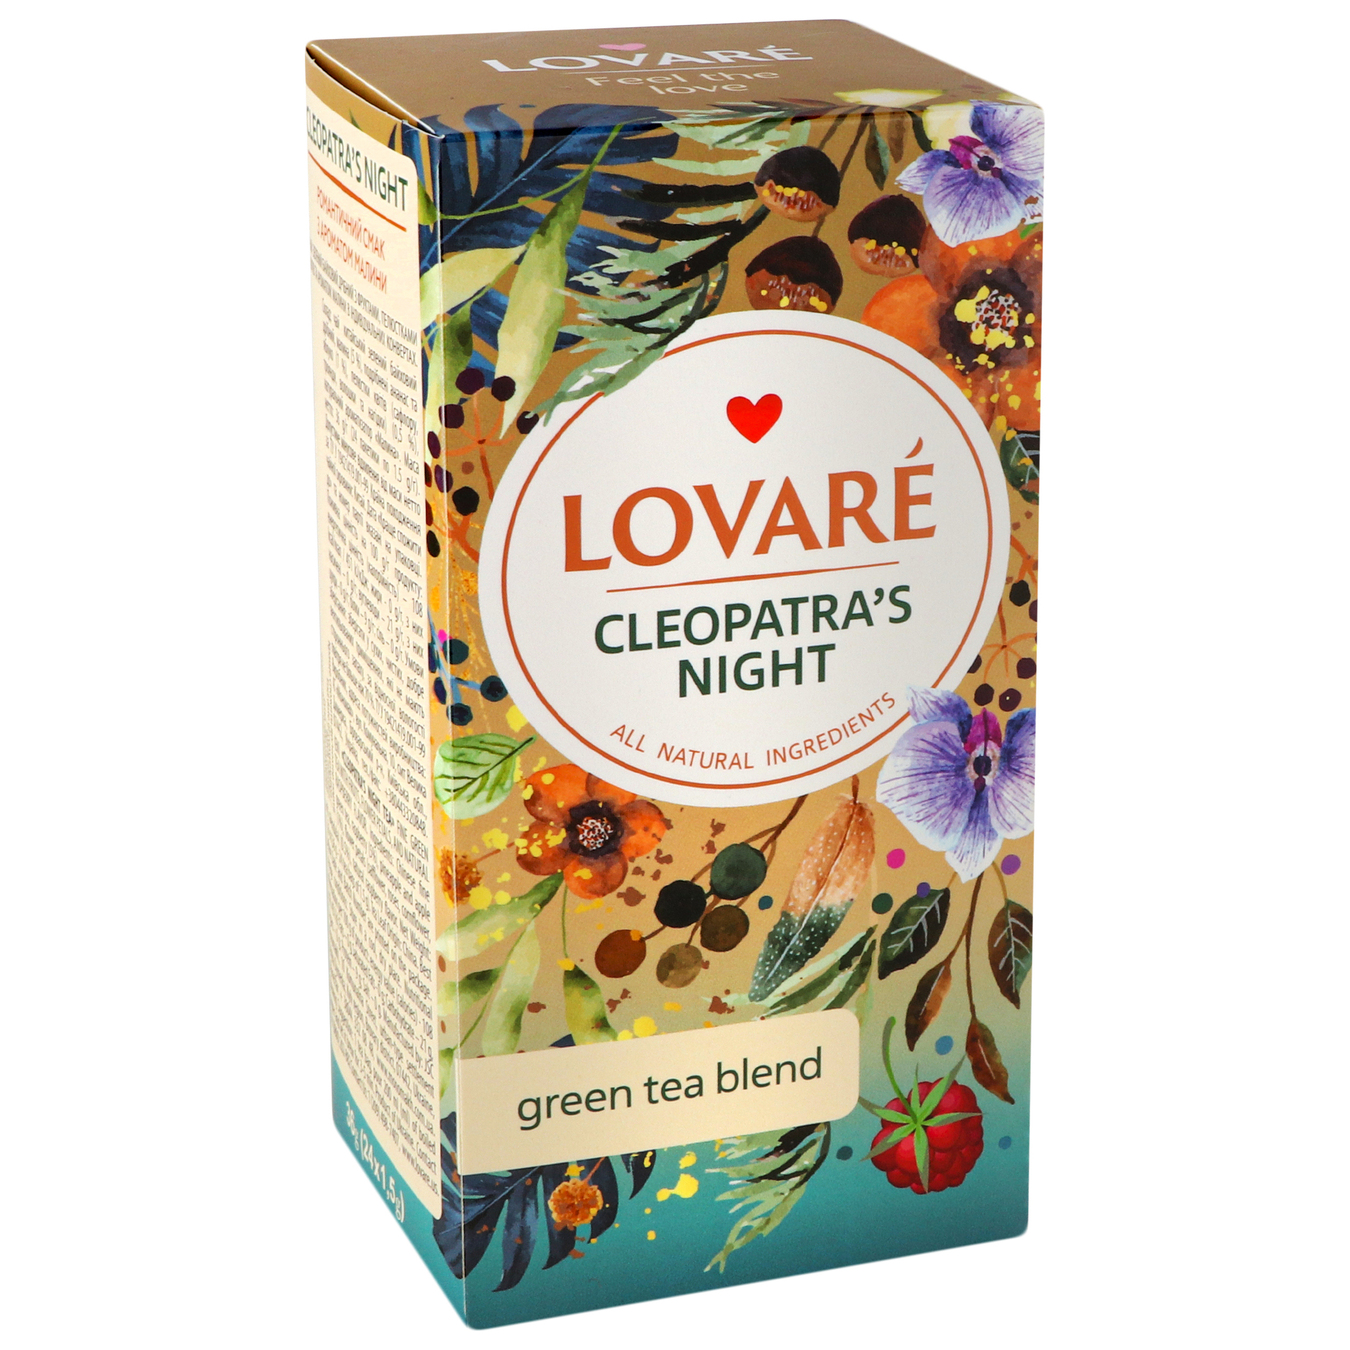 Lovare Cleopatra's Night Leaf Green Tea with Berries and Fruits 24pcs * 2g 5